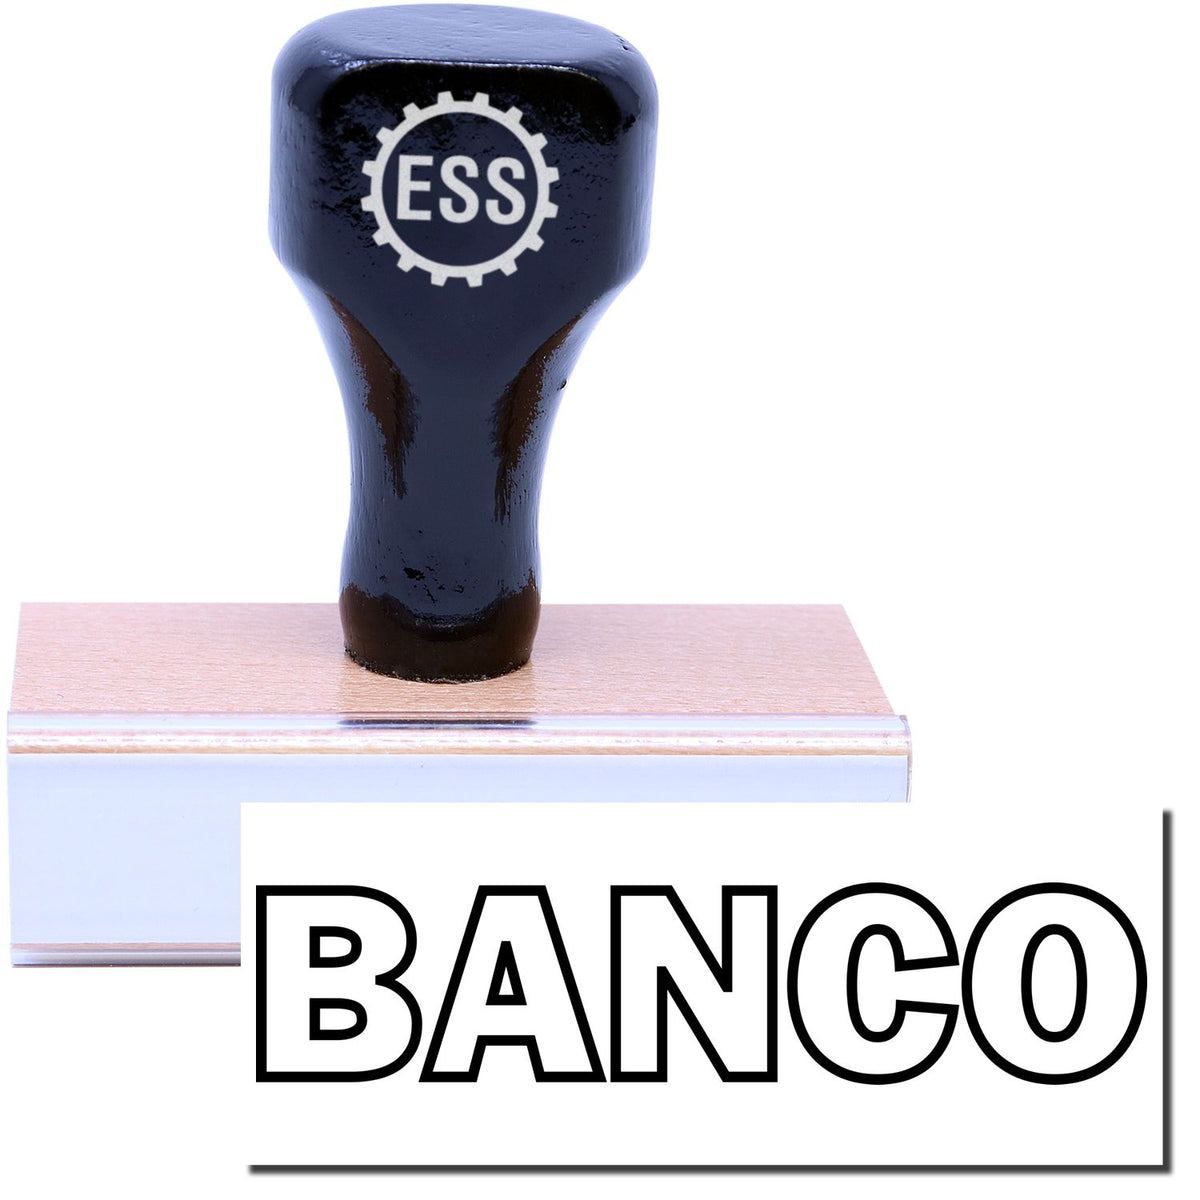 A stock office rubber stamp with a stamped image showing how the text &quot;BANCO&quot; in a large outline font is displayed after stamping.